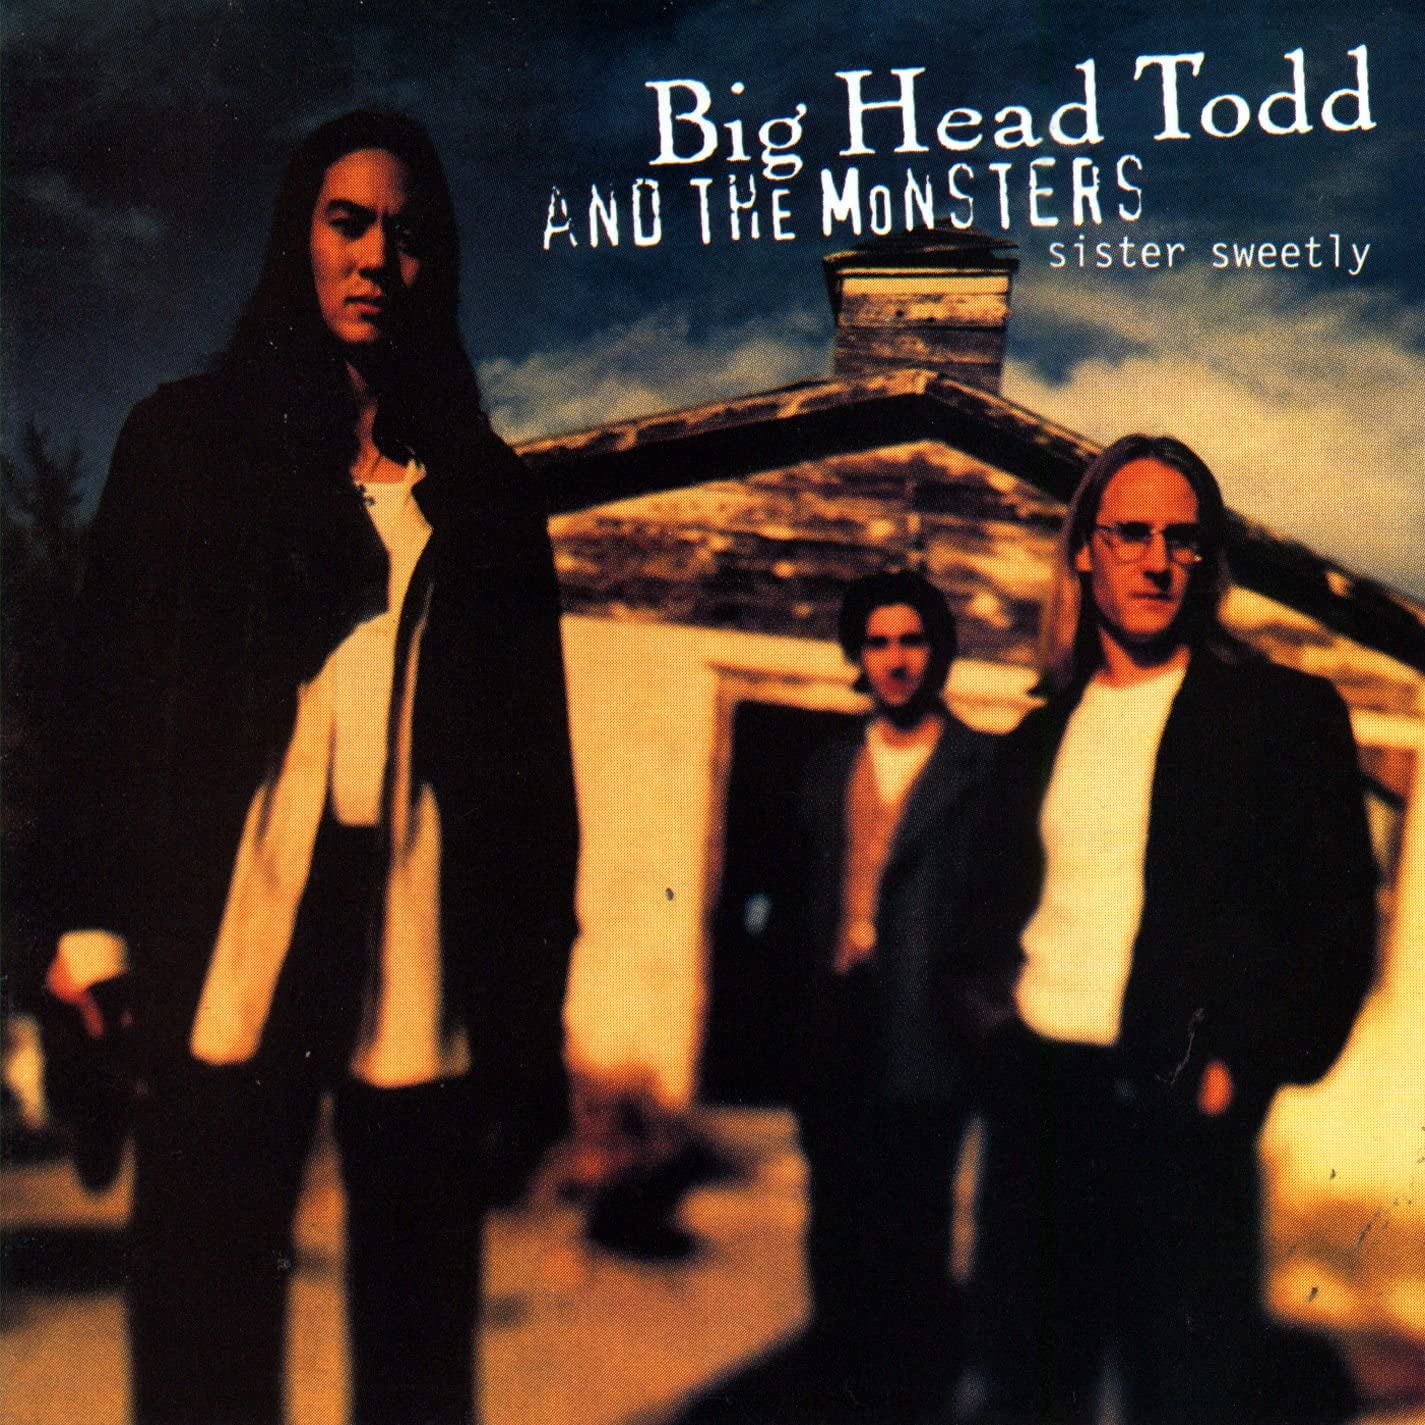 Big Head Todd And The Monsters - SIster Sweetly - USED CD